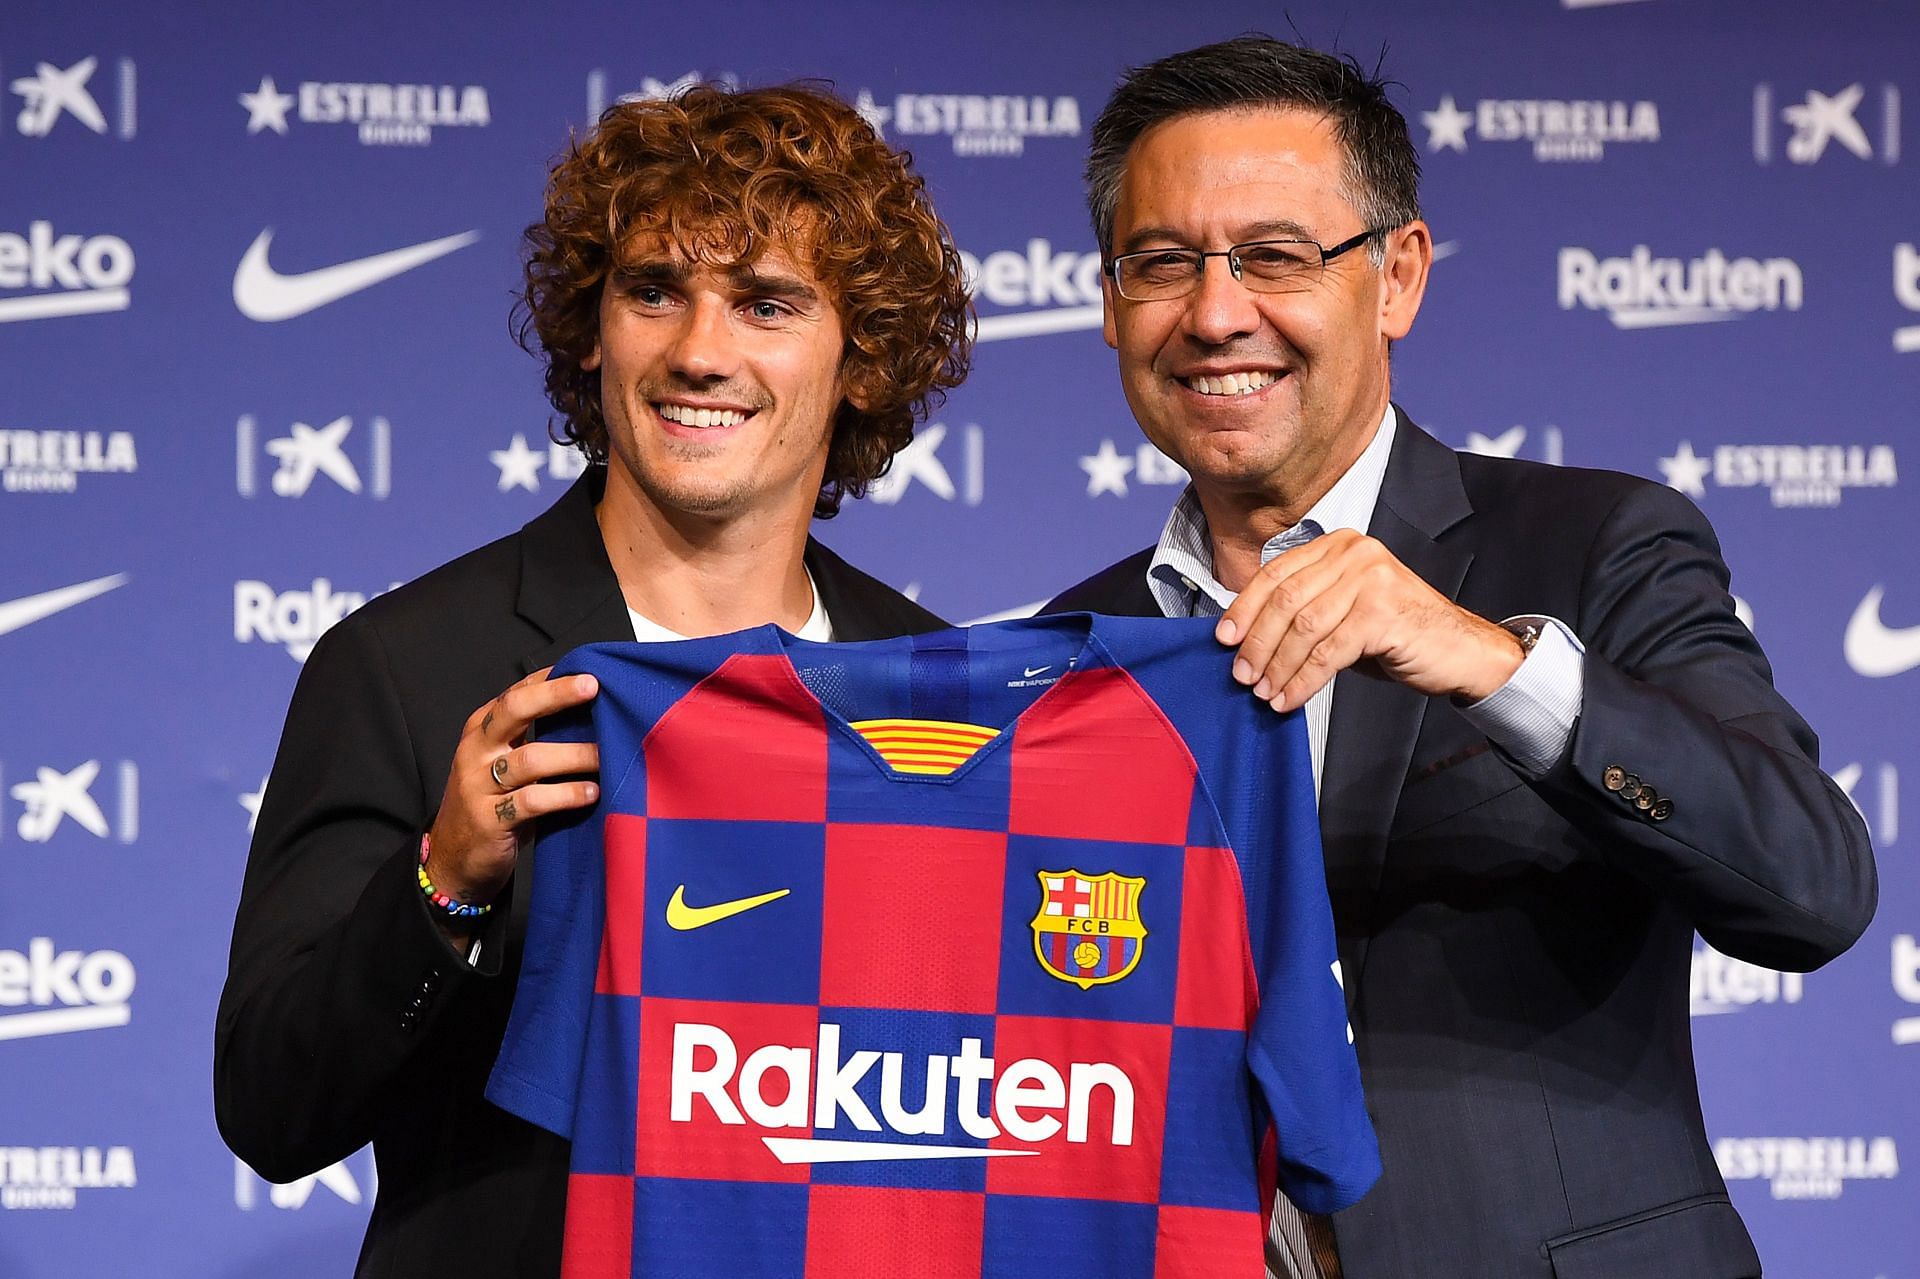 The club made several ill-advised moves under Josep Maria Bartomeu, such as spending big on Antoine Grizemann.